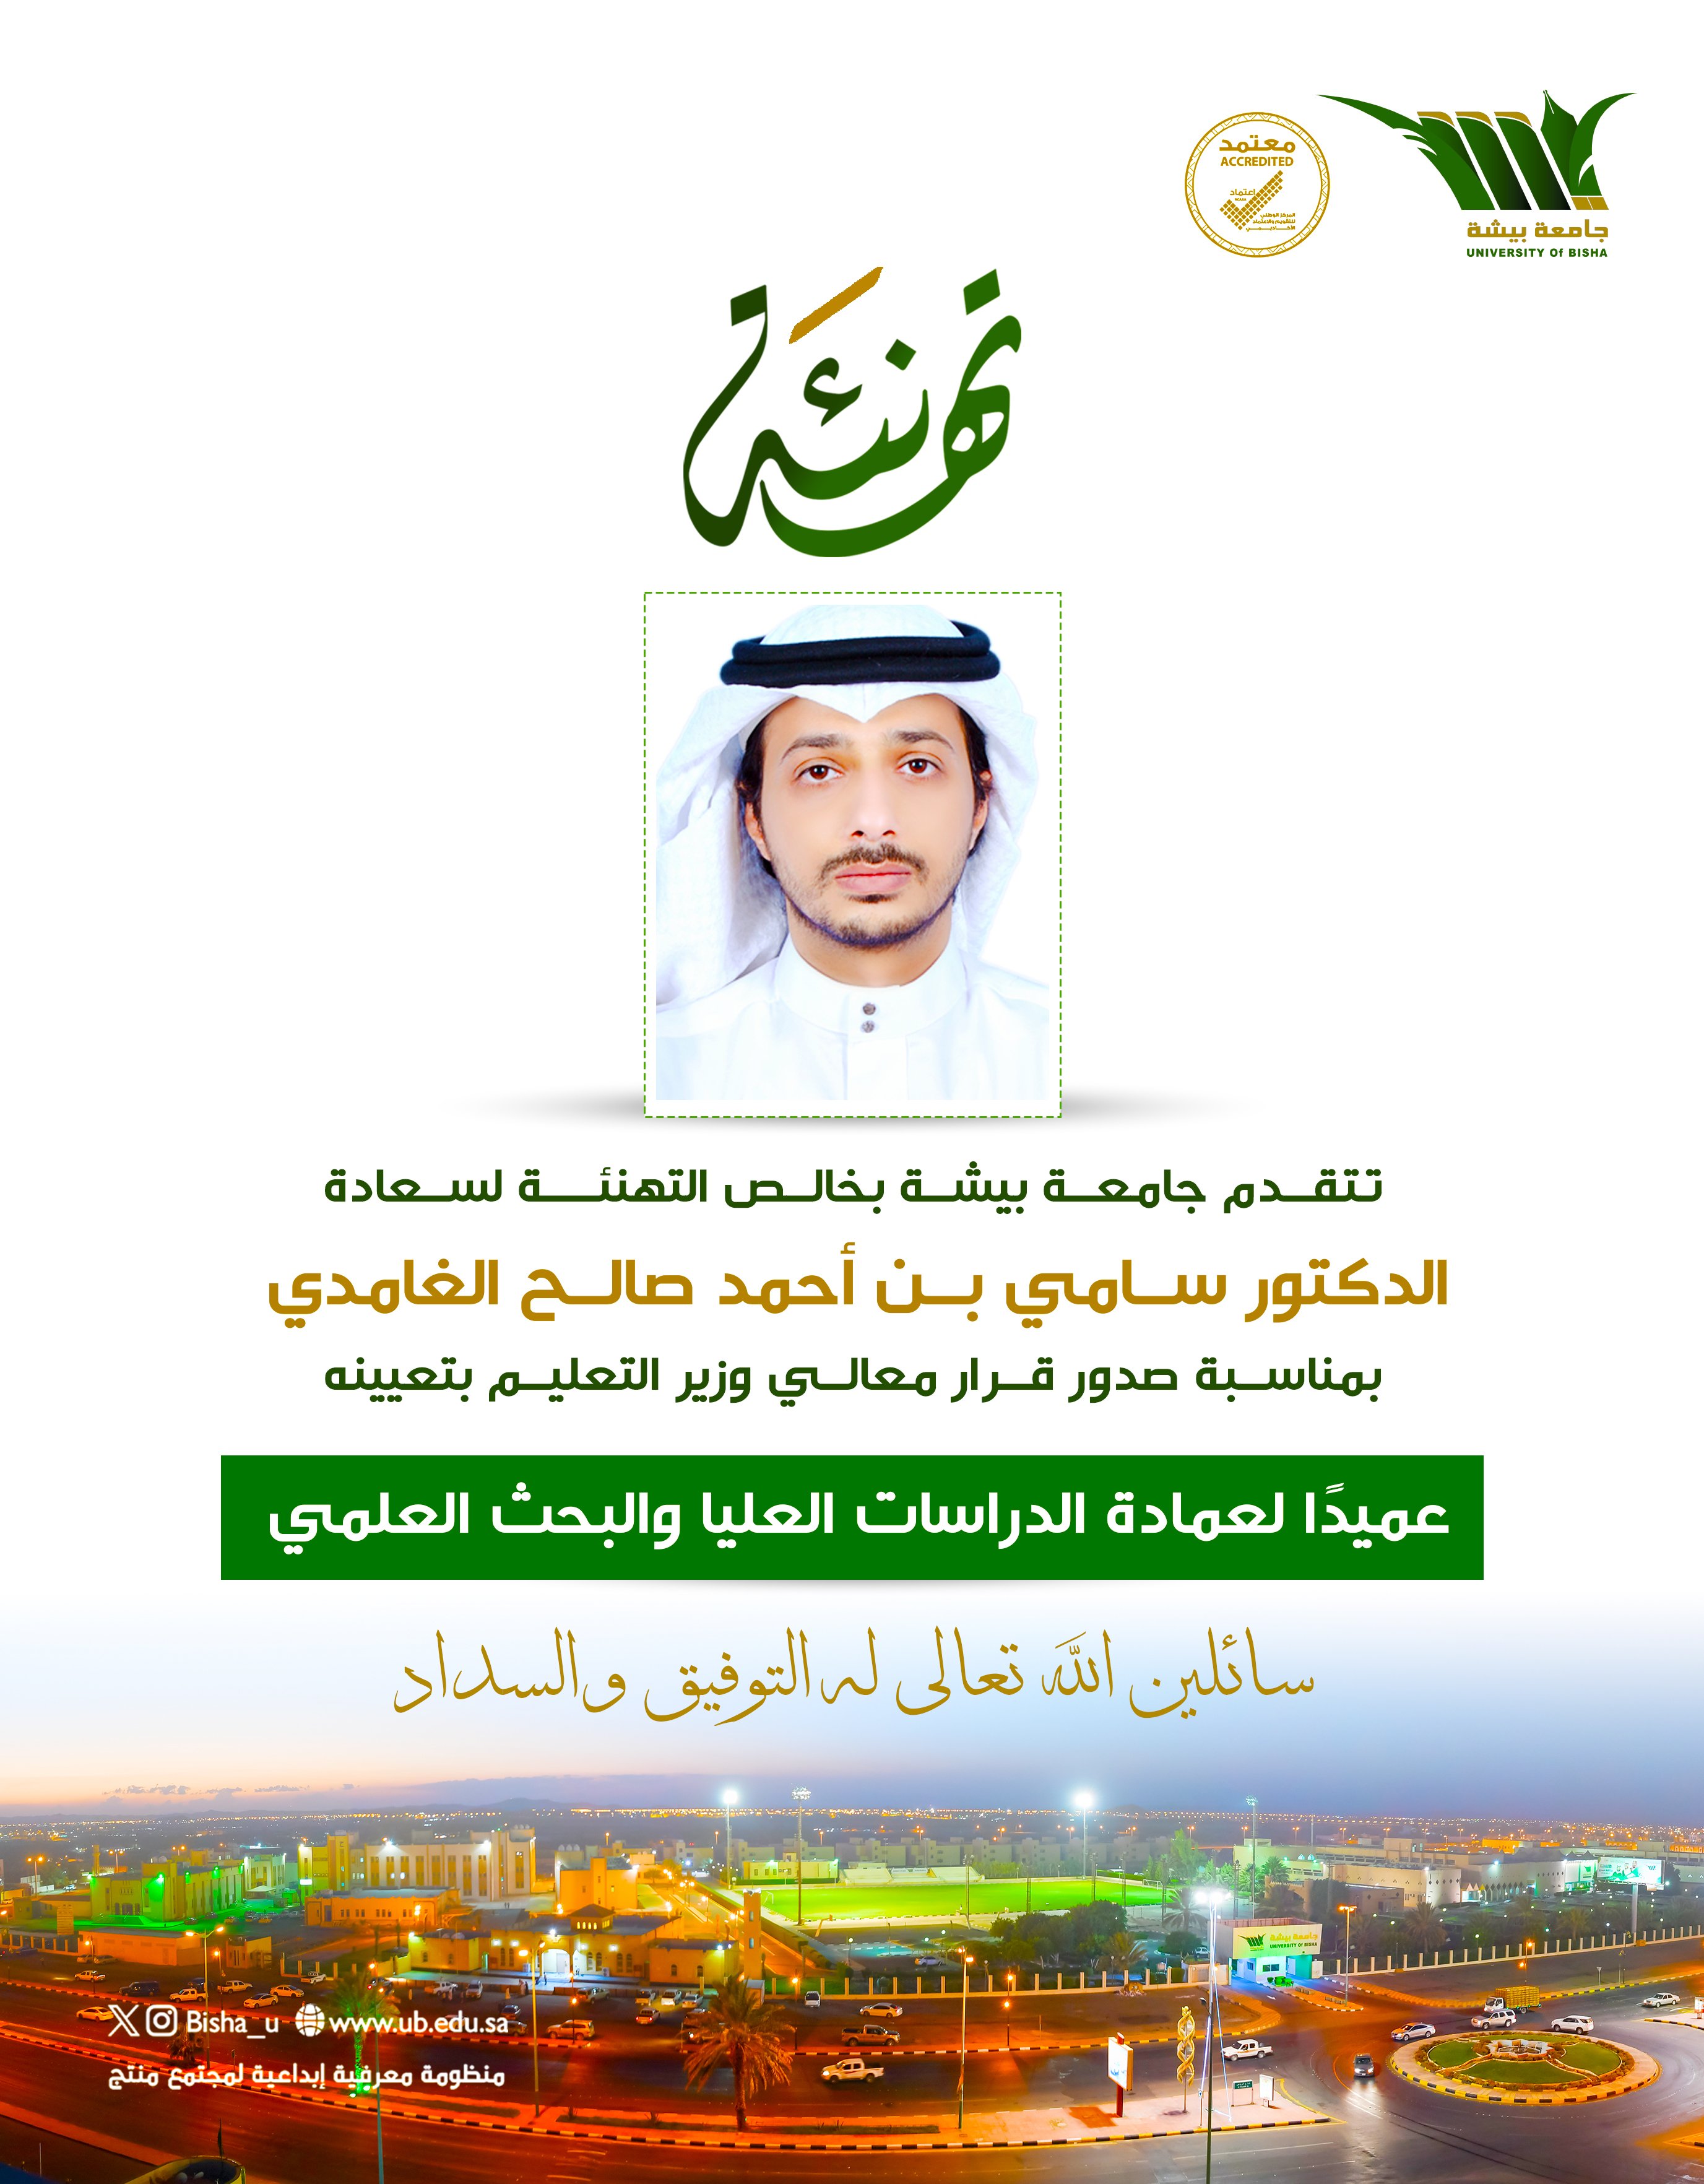 The Deanship of Graduate Studies and Scientific Research extends its sincere congratulations to His Excellency Dr. Sami bin Ahmed Al-Ghamdi